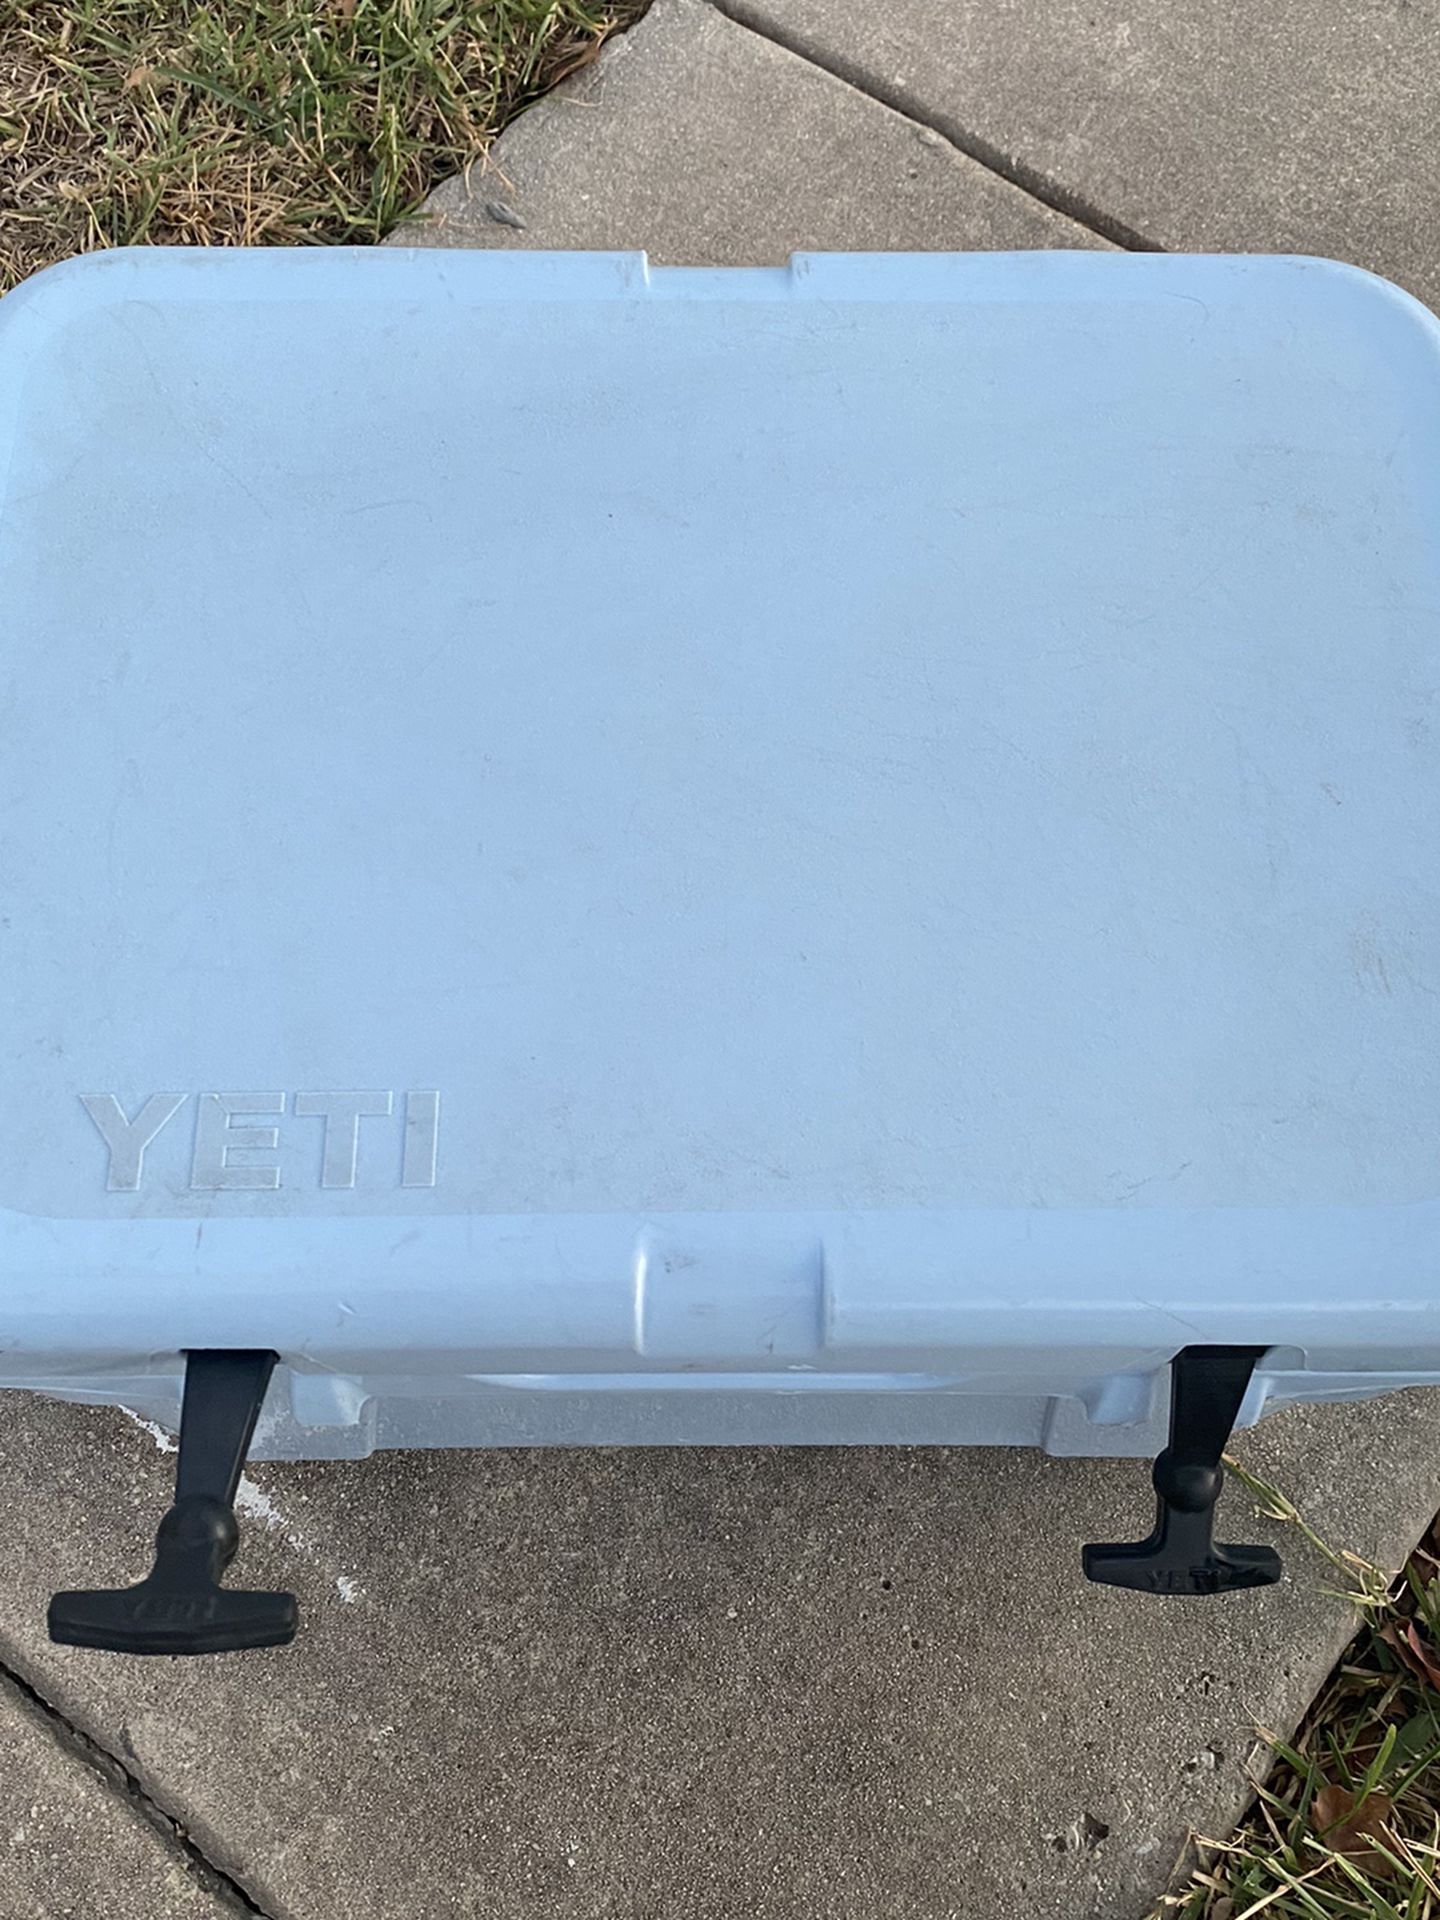 Yeti 35 Cooler Used Good Conditions